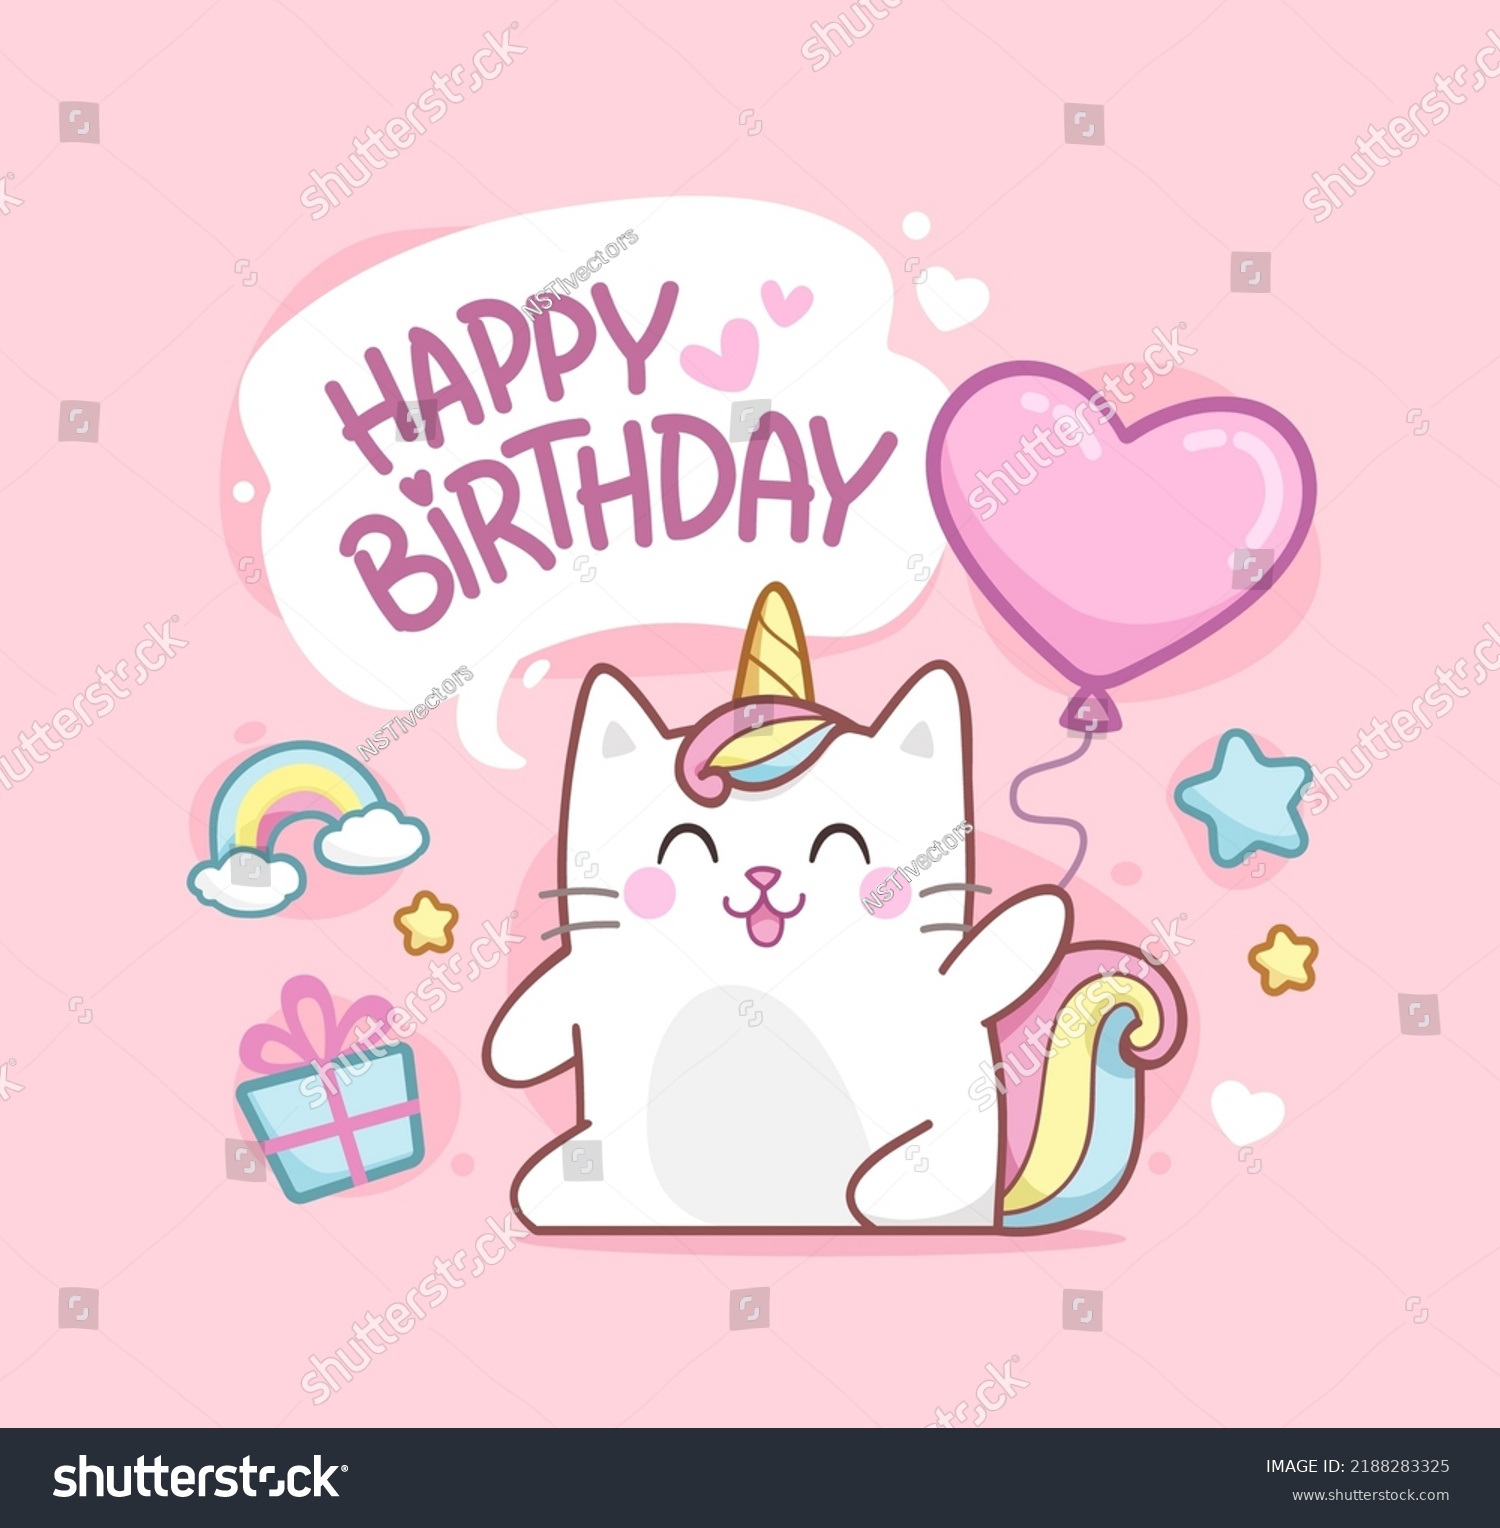 SVG of Cute baby Caticorn kitten or Cat Unicorn on happy birthday card template. Happy birthday card design with cute kawaii kitten. Unicorn cat with congratulations and a balloon in hand svg